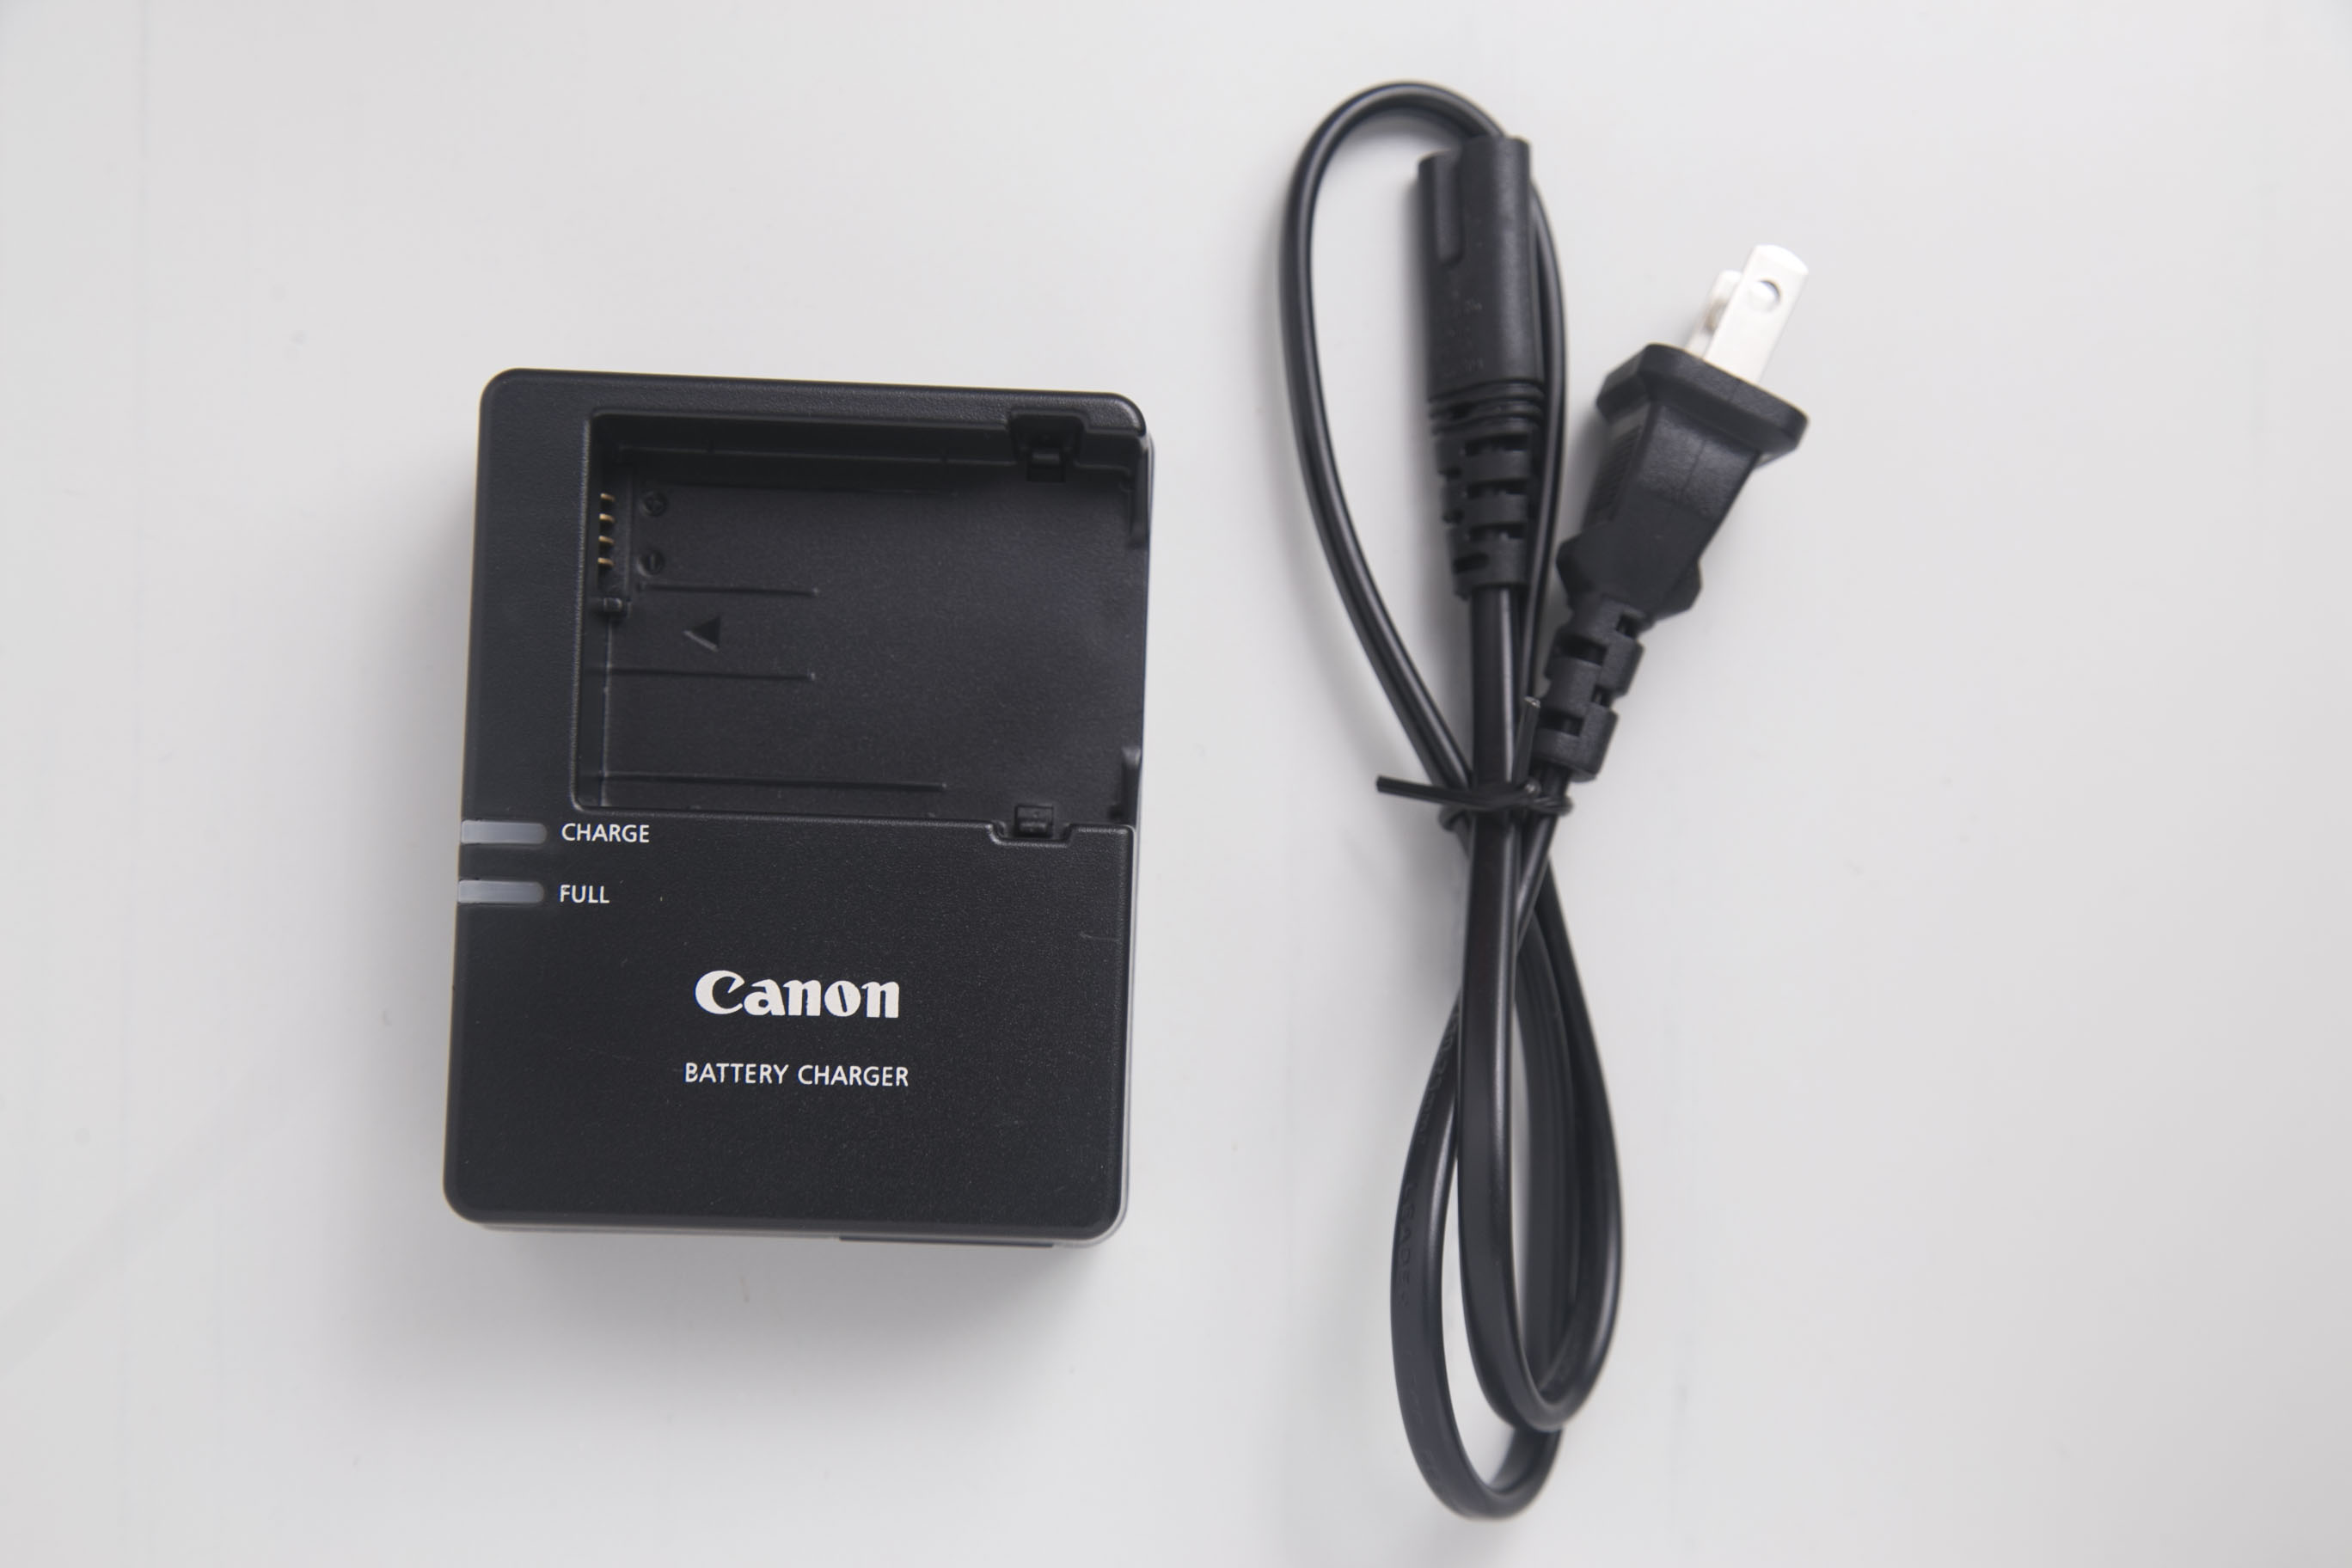 LC-E8 Battery Charger for Canon LP-E8 Rebel T2i T3i T4i T5i EOS 550D 600D 650D 700D 